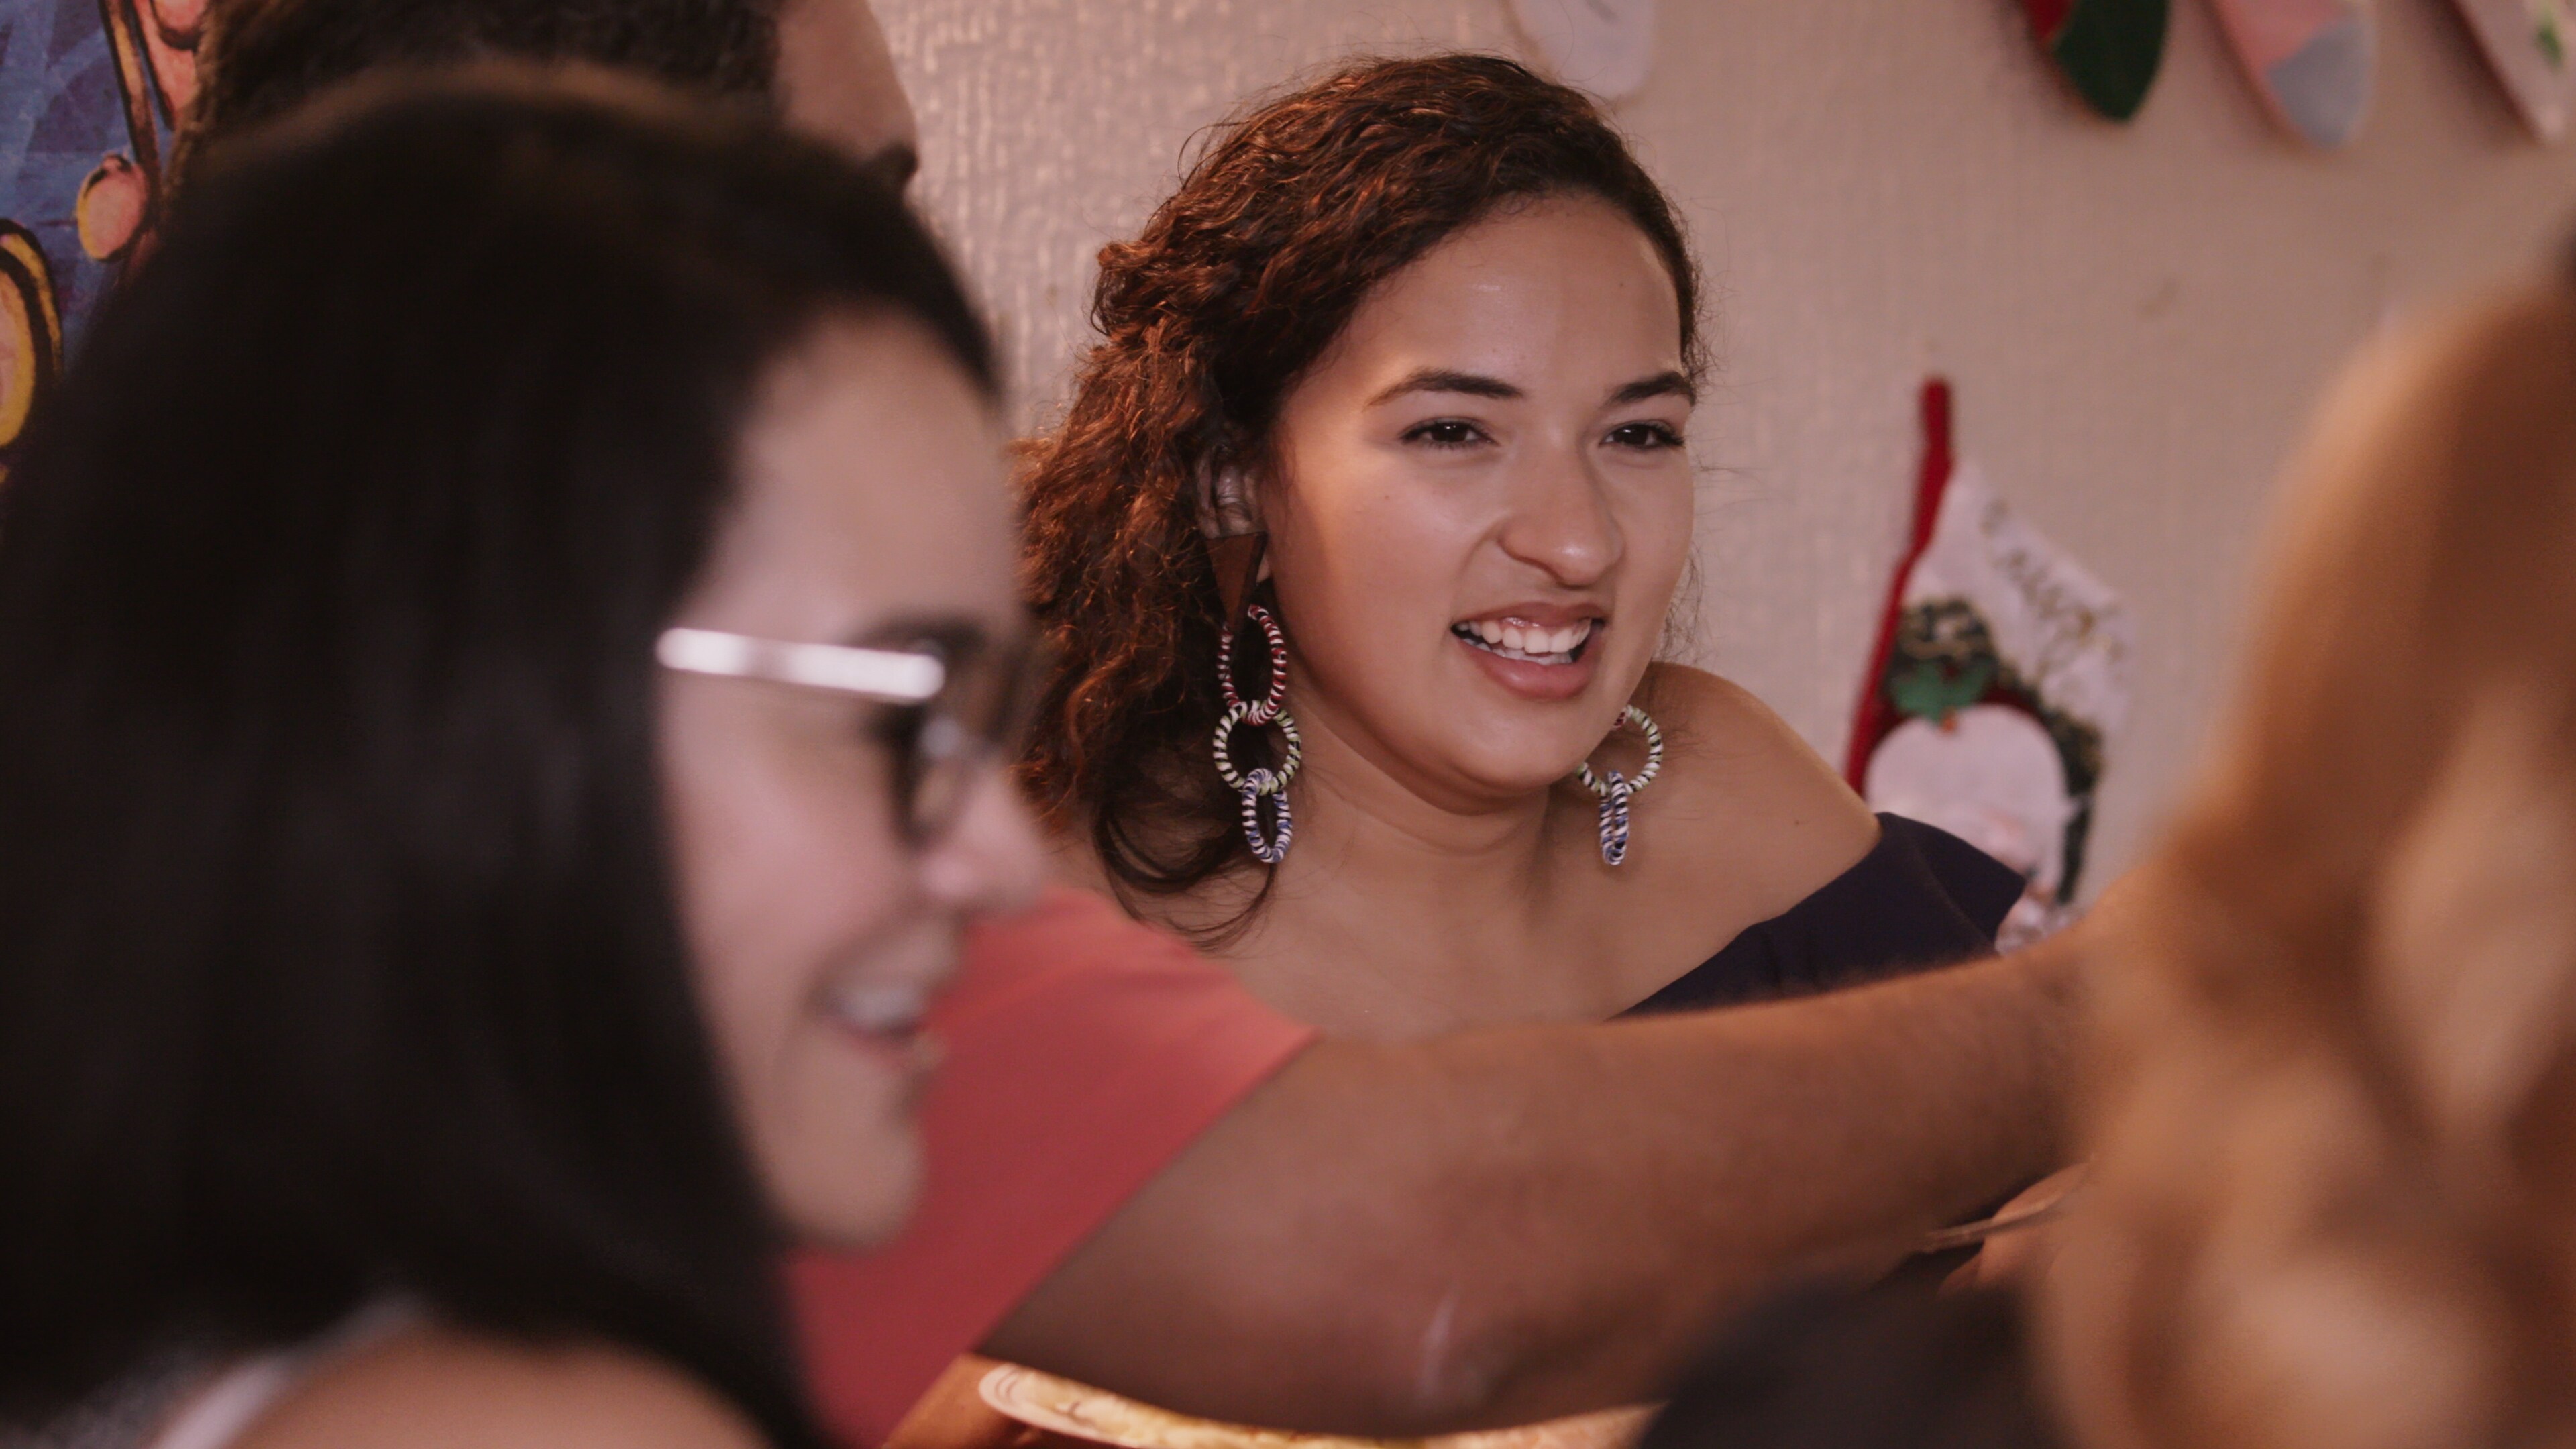 Bayamon, Puerto Rico - Alondra Toledo has dinner with her family in Puerto Rico. (Credit: Future of Work Film Inc)